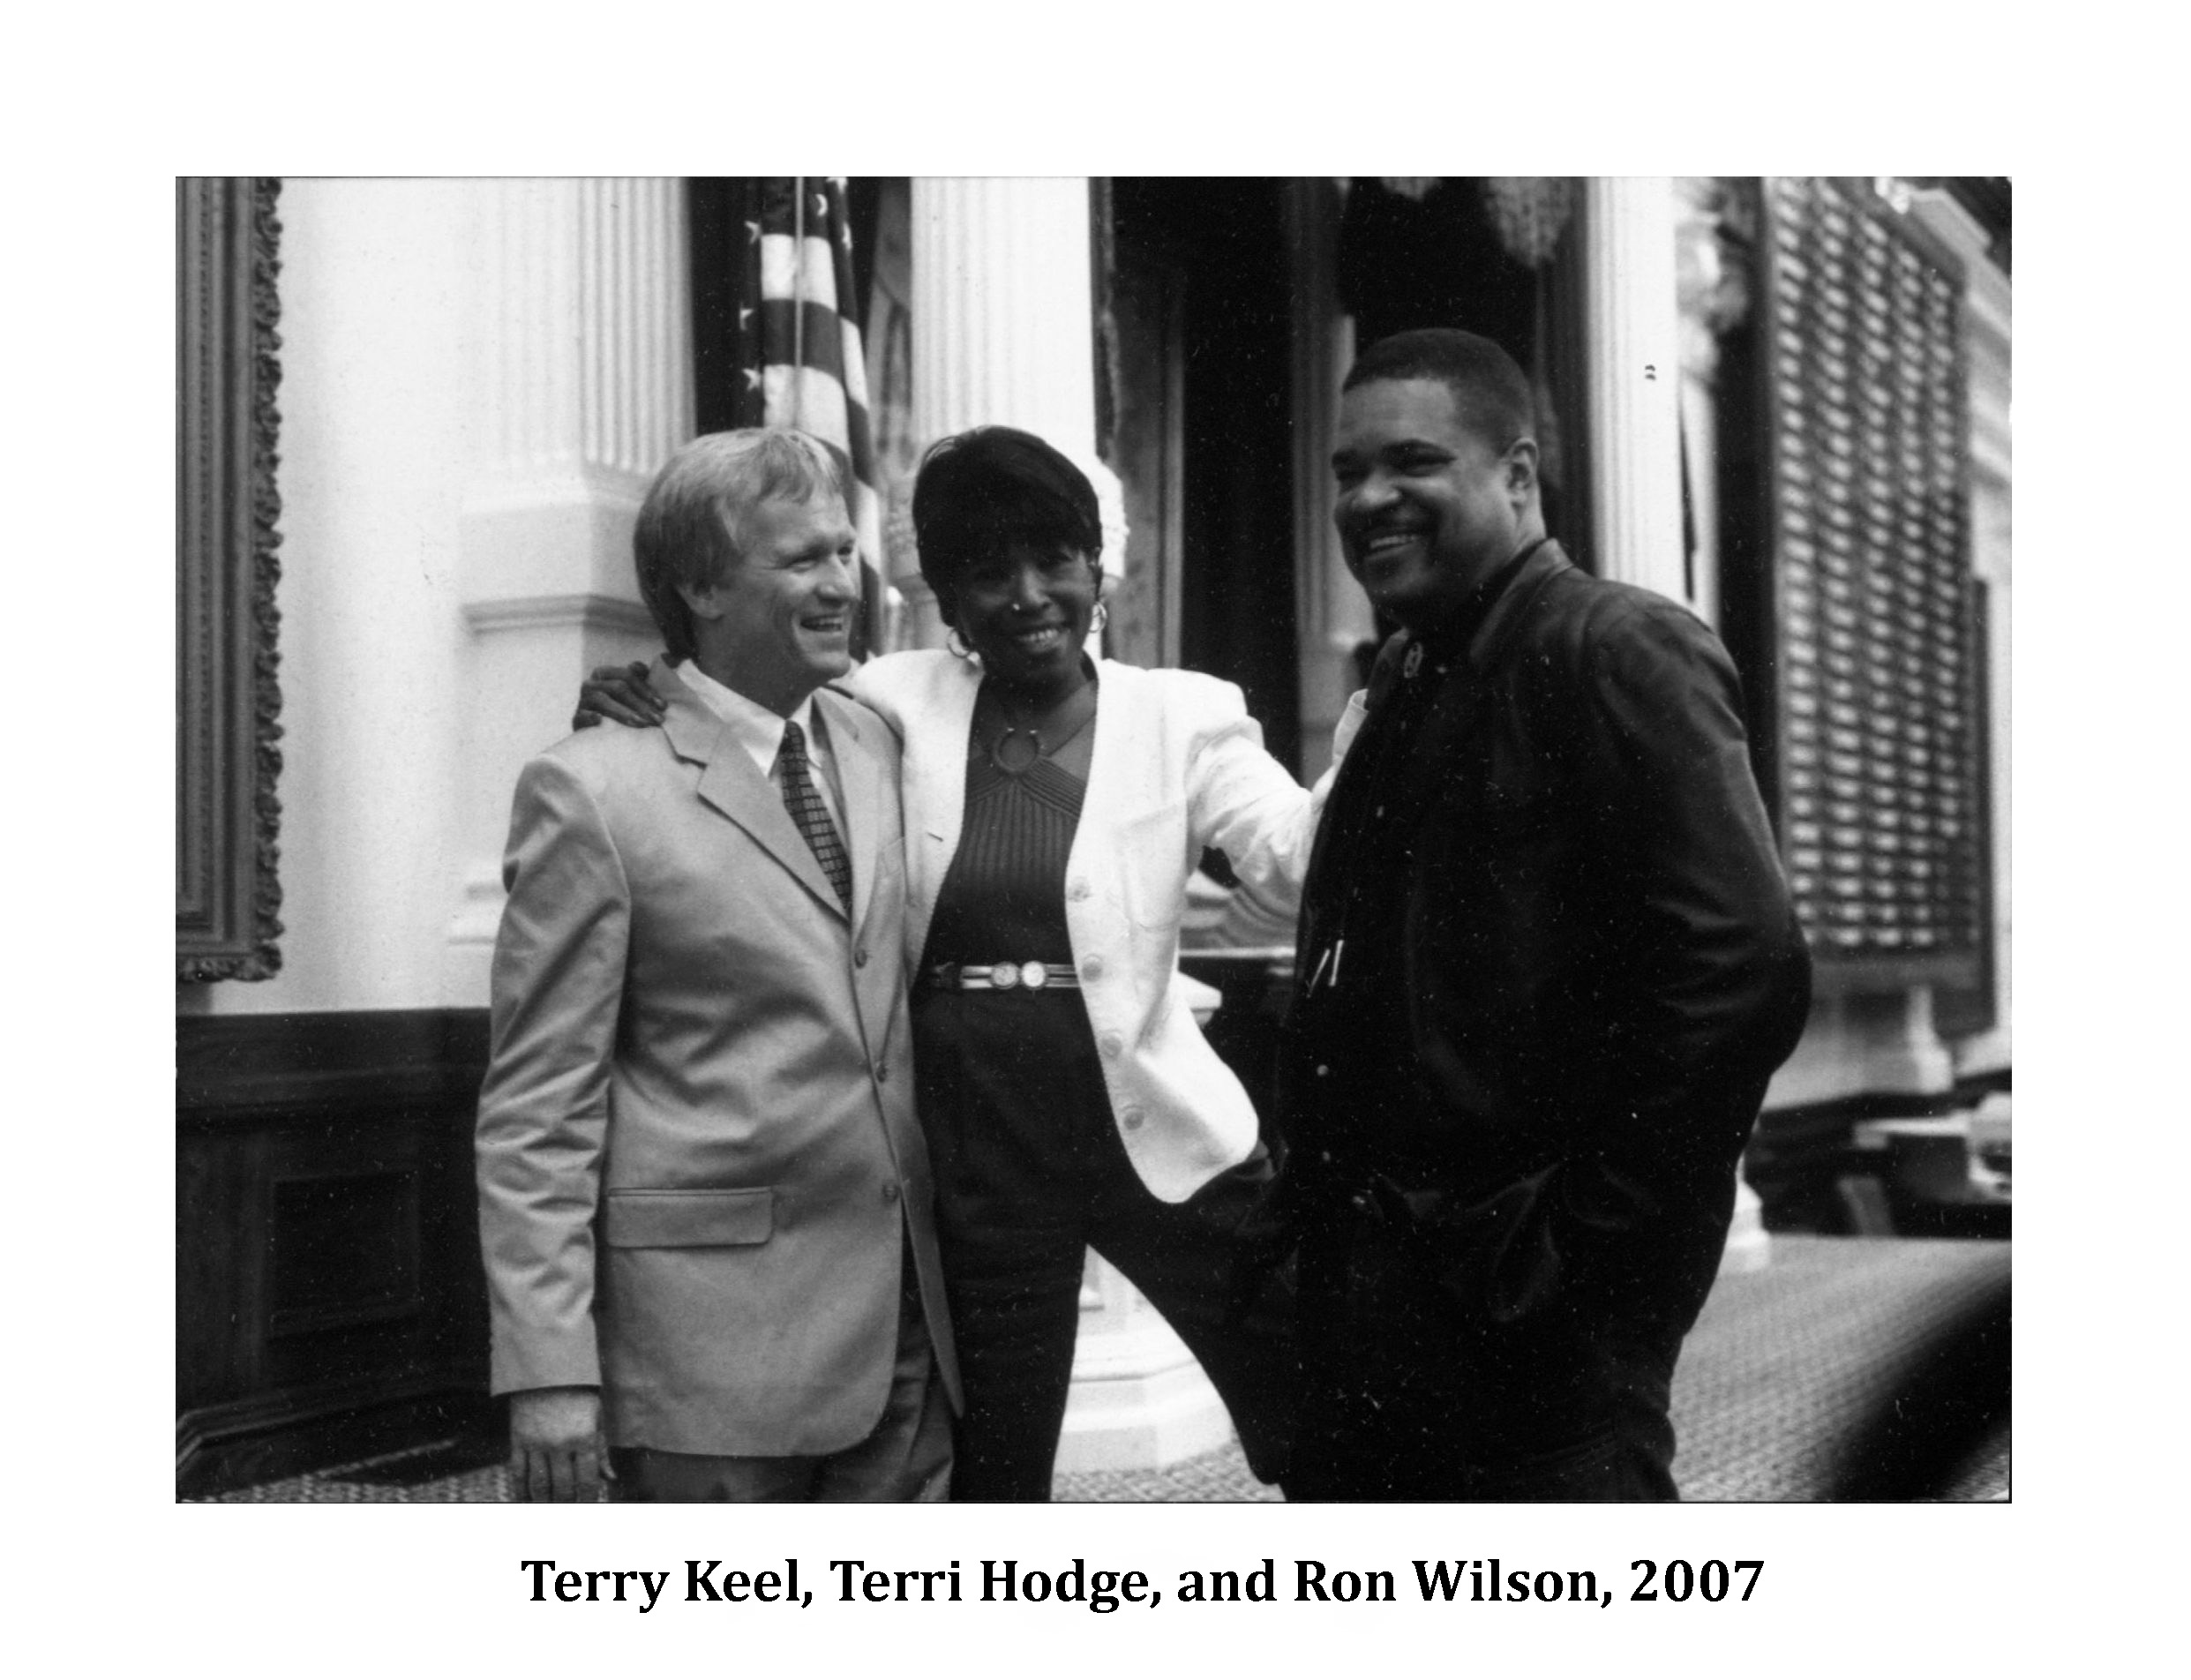 Terry Keel, Terri Hodge, and Ron Wilson in the Texas House of Representatives, 2007. Photo courtesy of Terry Keel